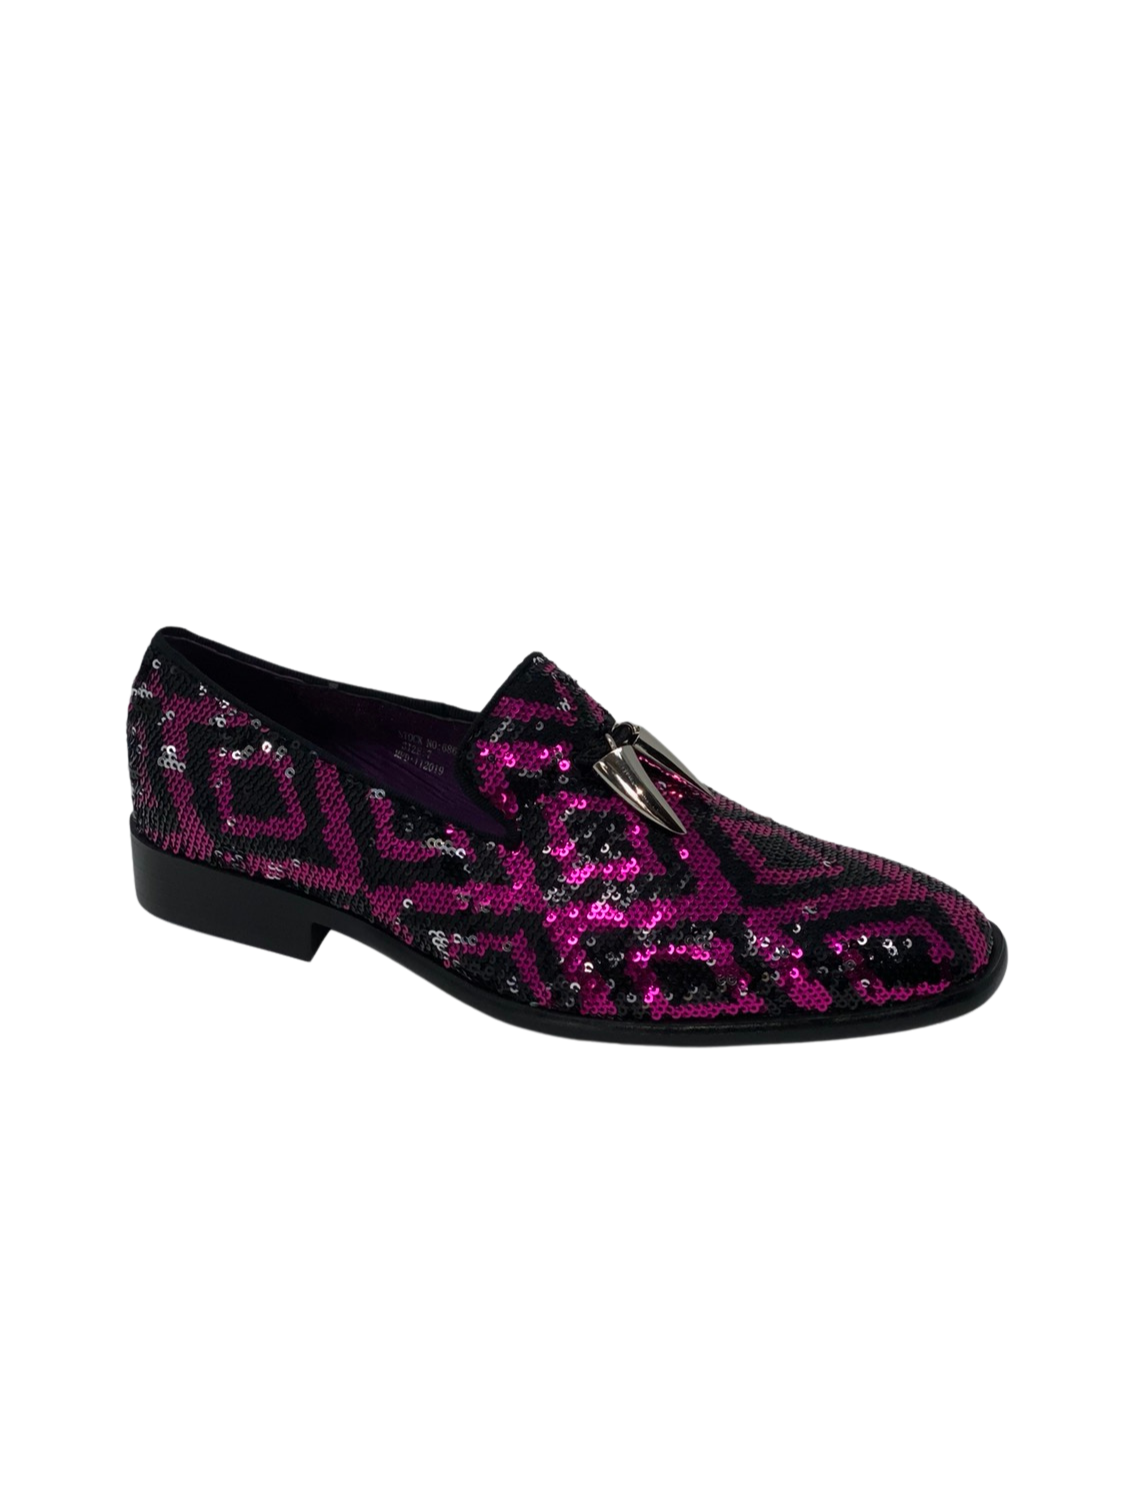 After Midnight Black and Fuchsia Sequin Formal Loafer